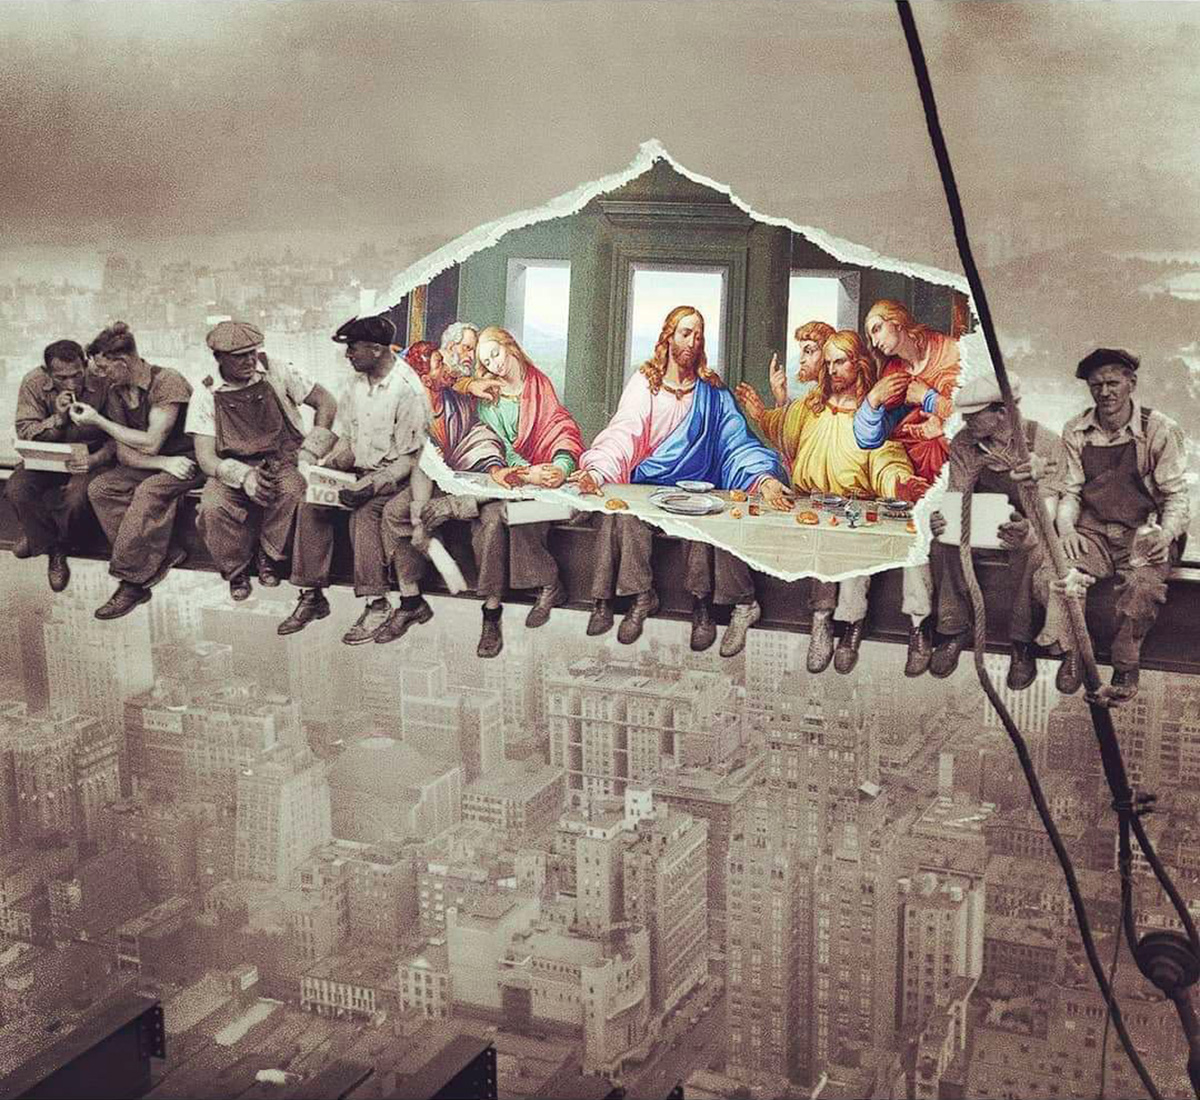 Breakfast in the Sky with the Last Supper